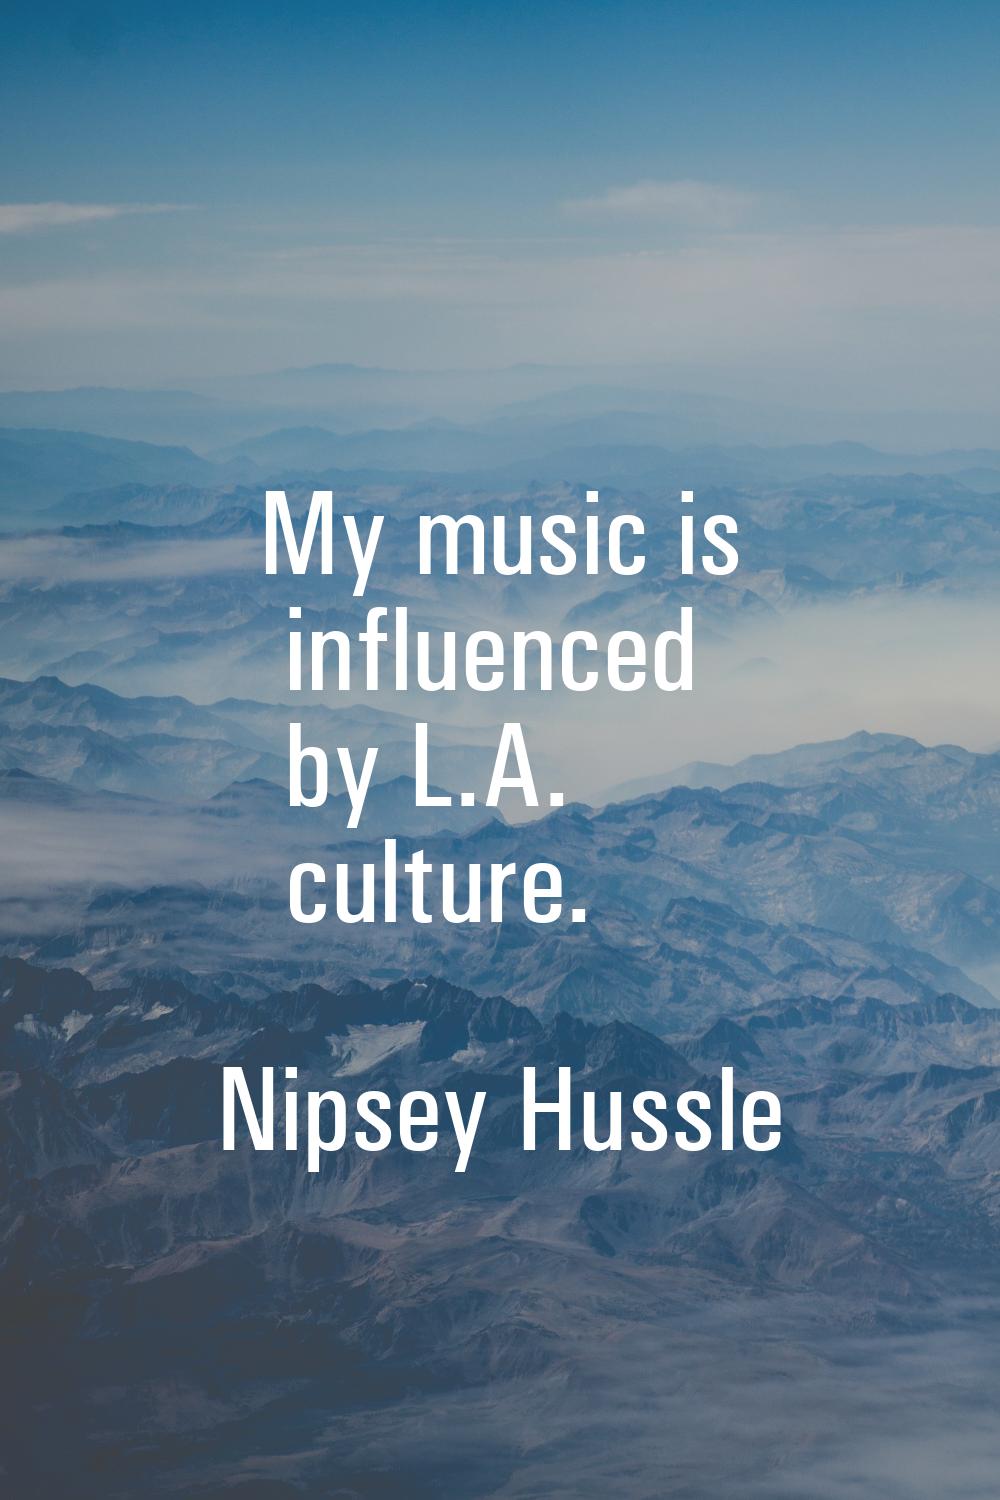 My music is influenced by L.A. culture.